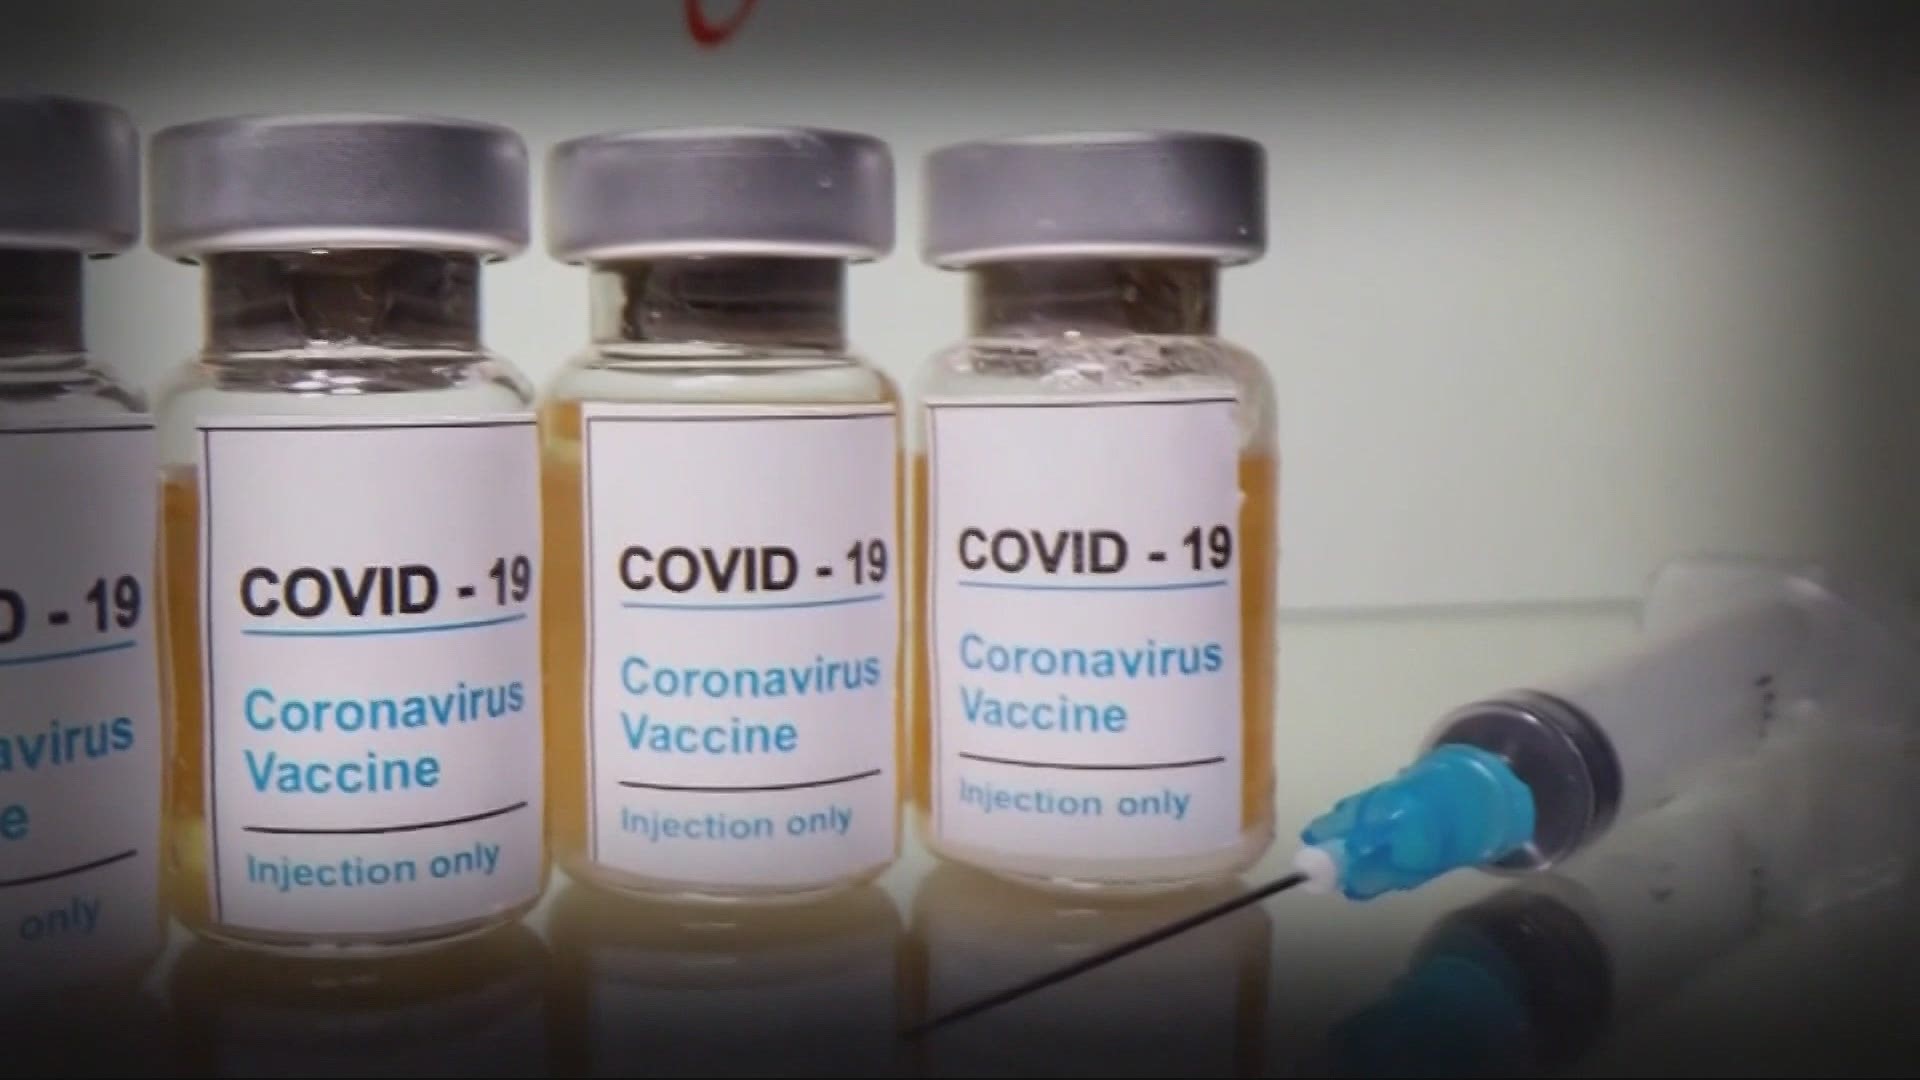 A Beaverton woman who developed blood clots after getting the Johnson & Johnson vaccine is talking about the scare. It happened after the pause on the vaccine.